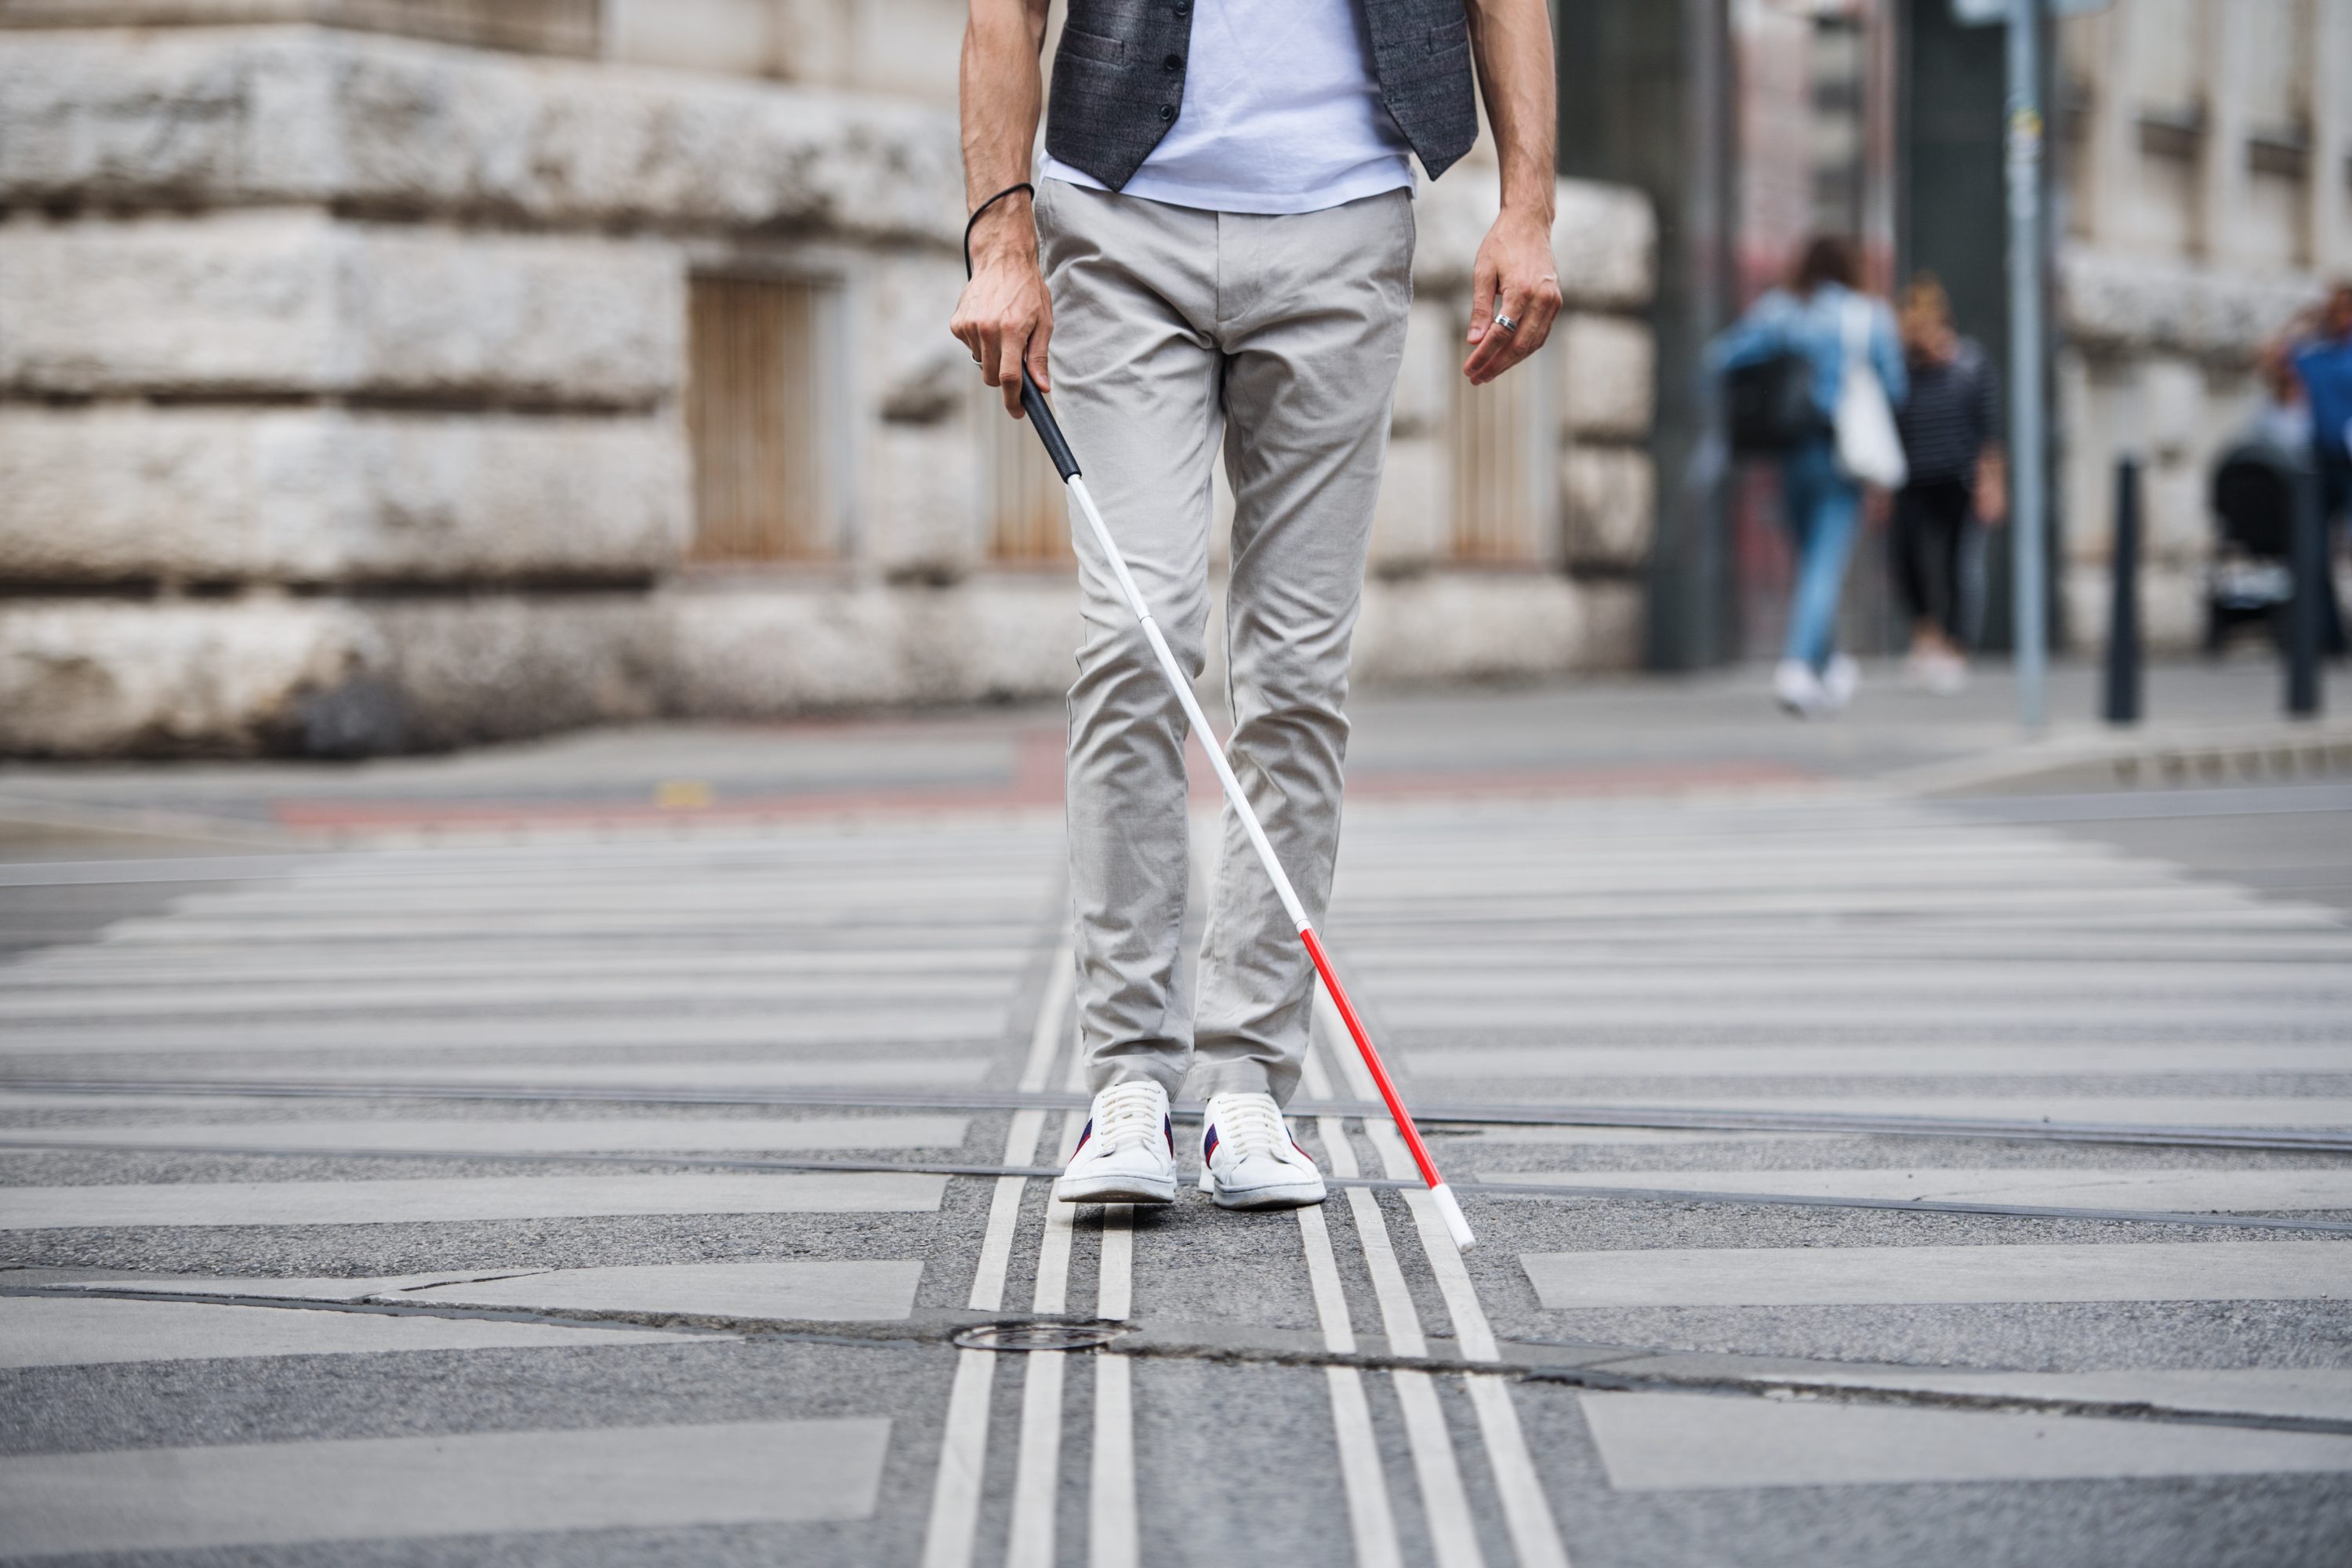 Pedestrian with a white cane on a crosswalk